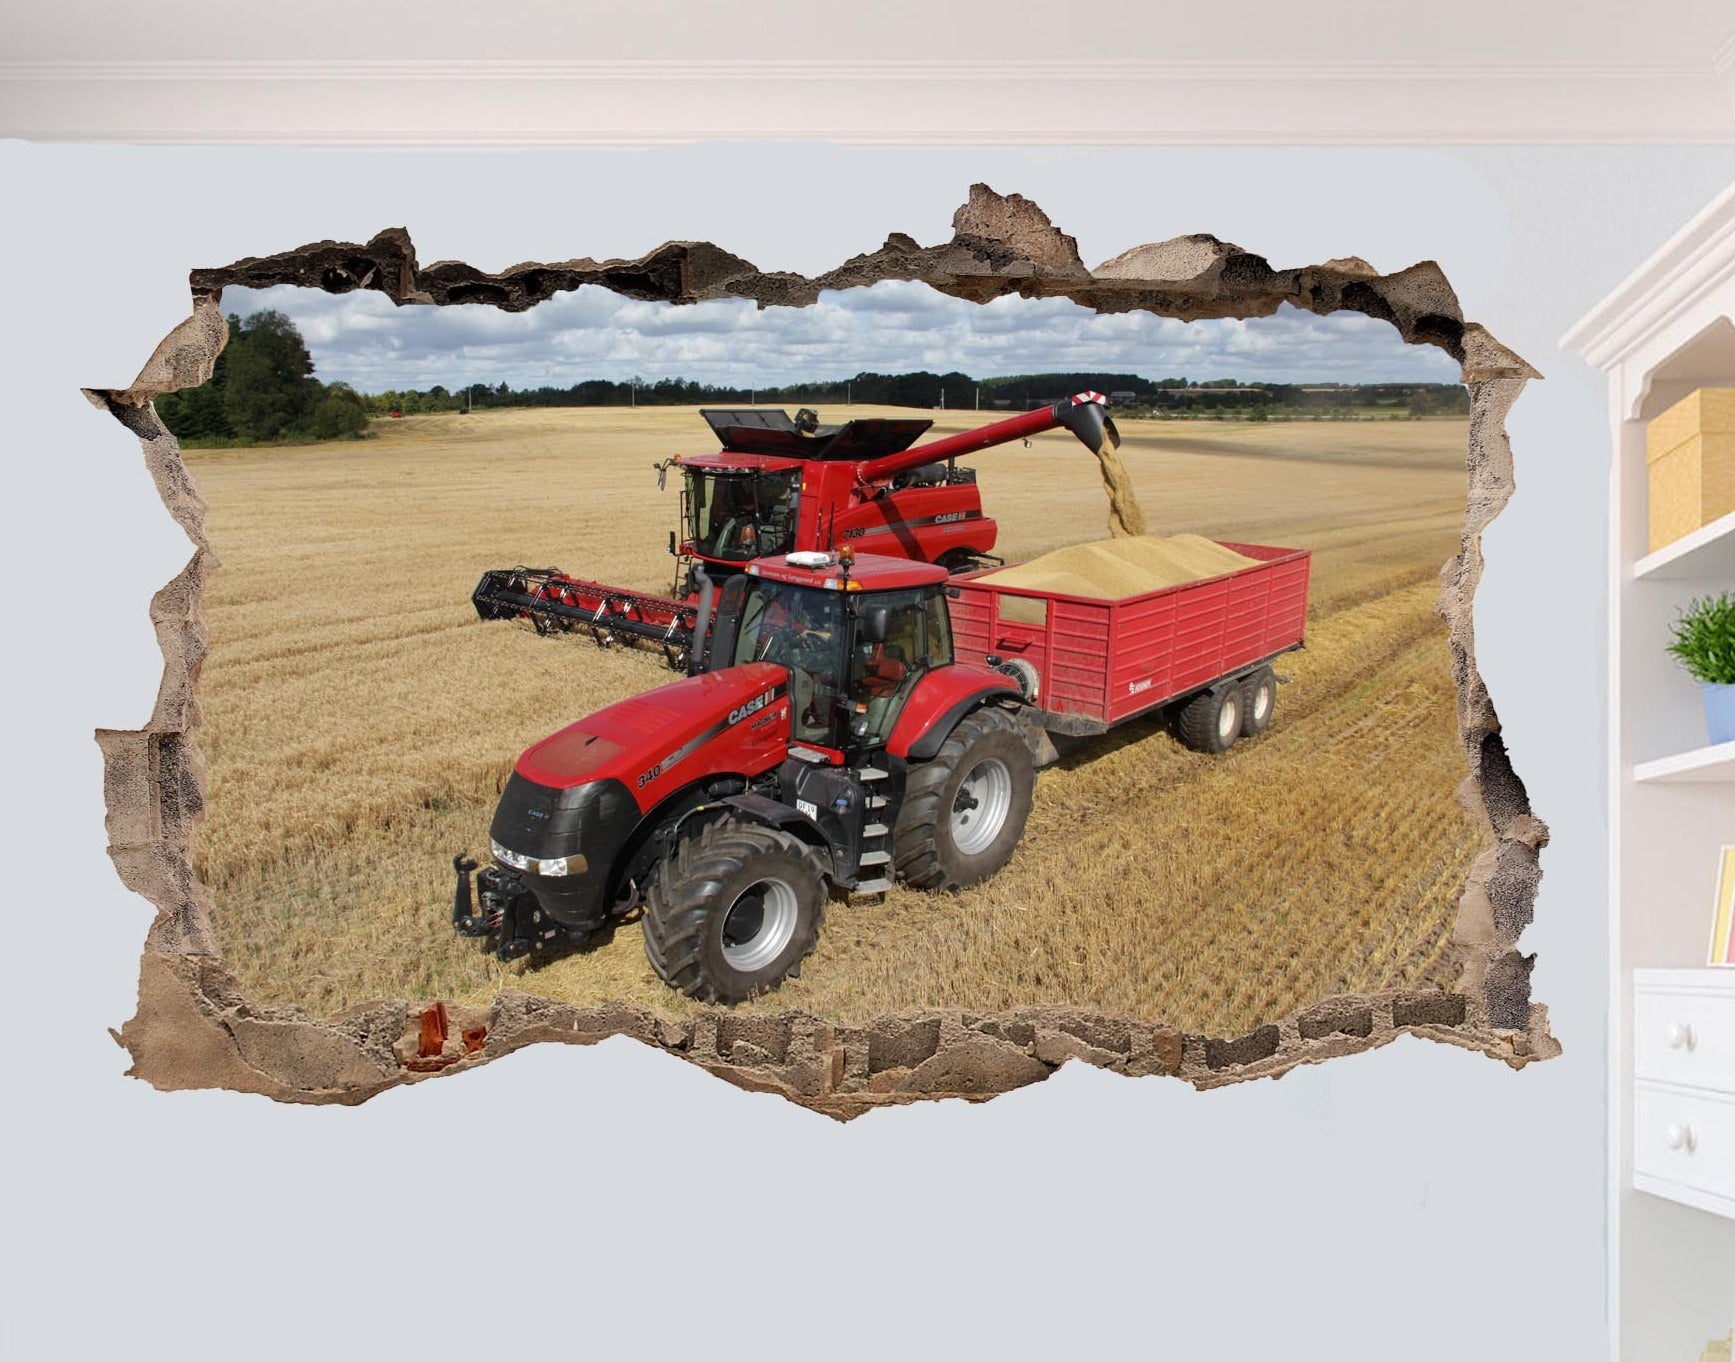 AGRICULTURAL MACHINERY CASE TRACTOR AND COMBINE HARVESTER WALL STICKER POSTER MURAL DECAL